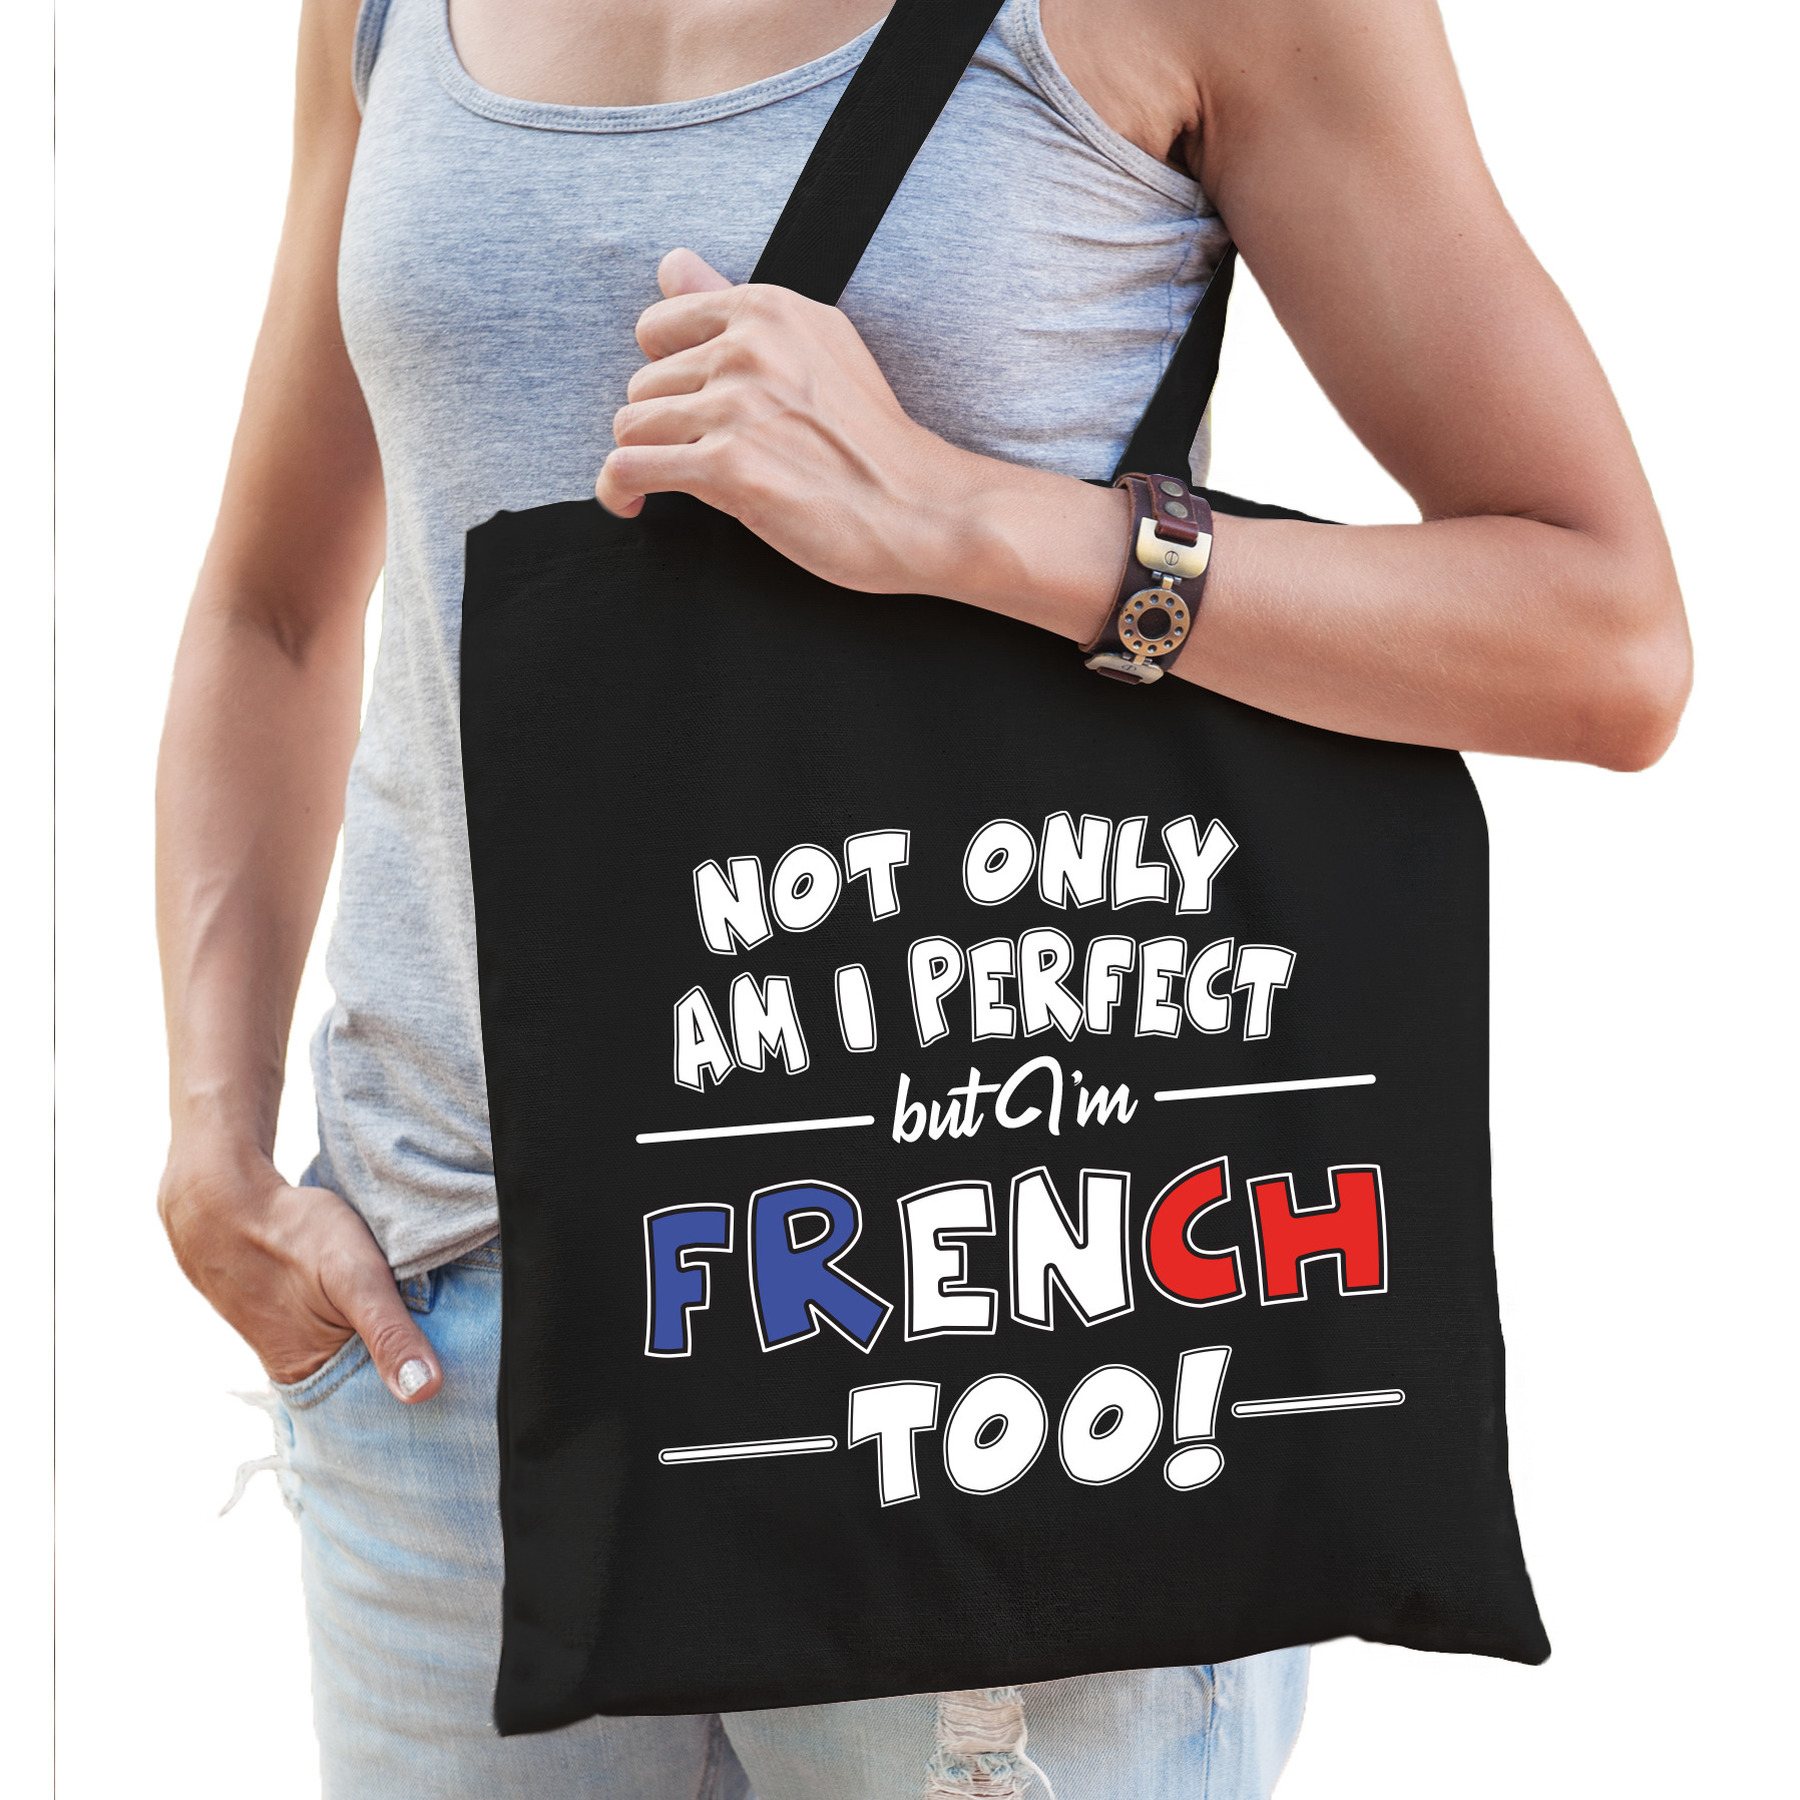 Not only perfect but French-Frankrijk too fun cadeau tas voor dames